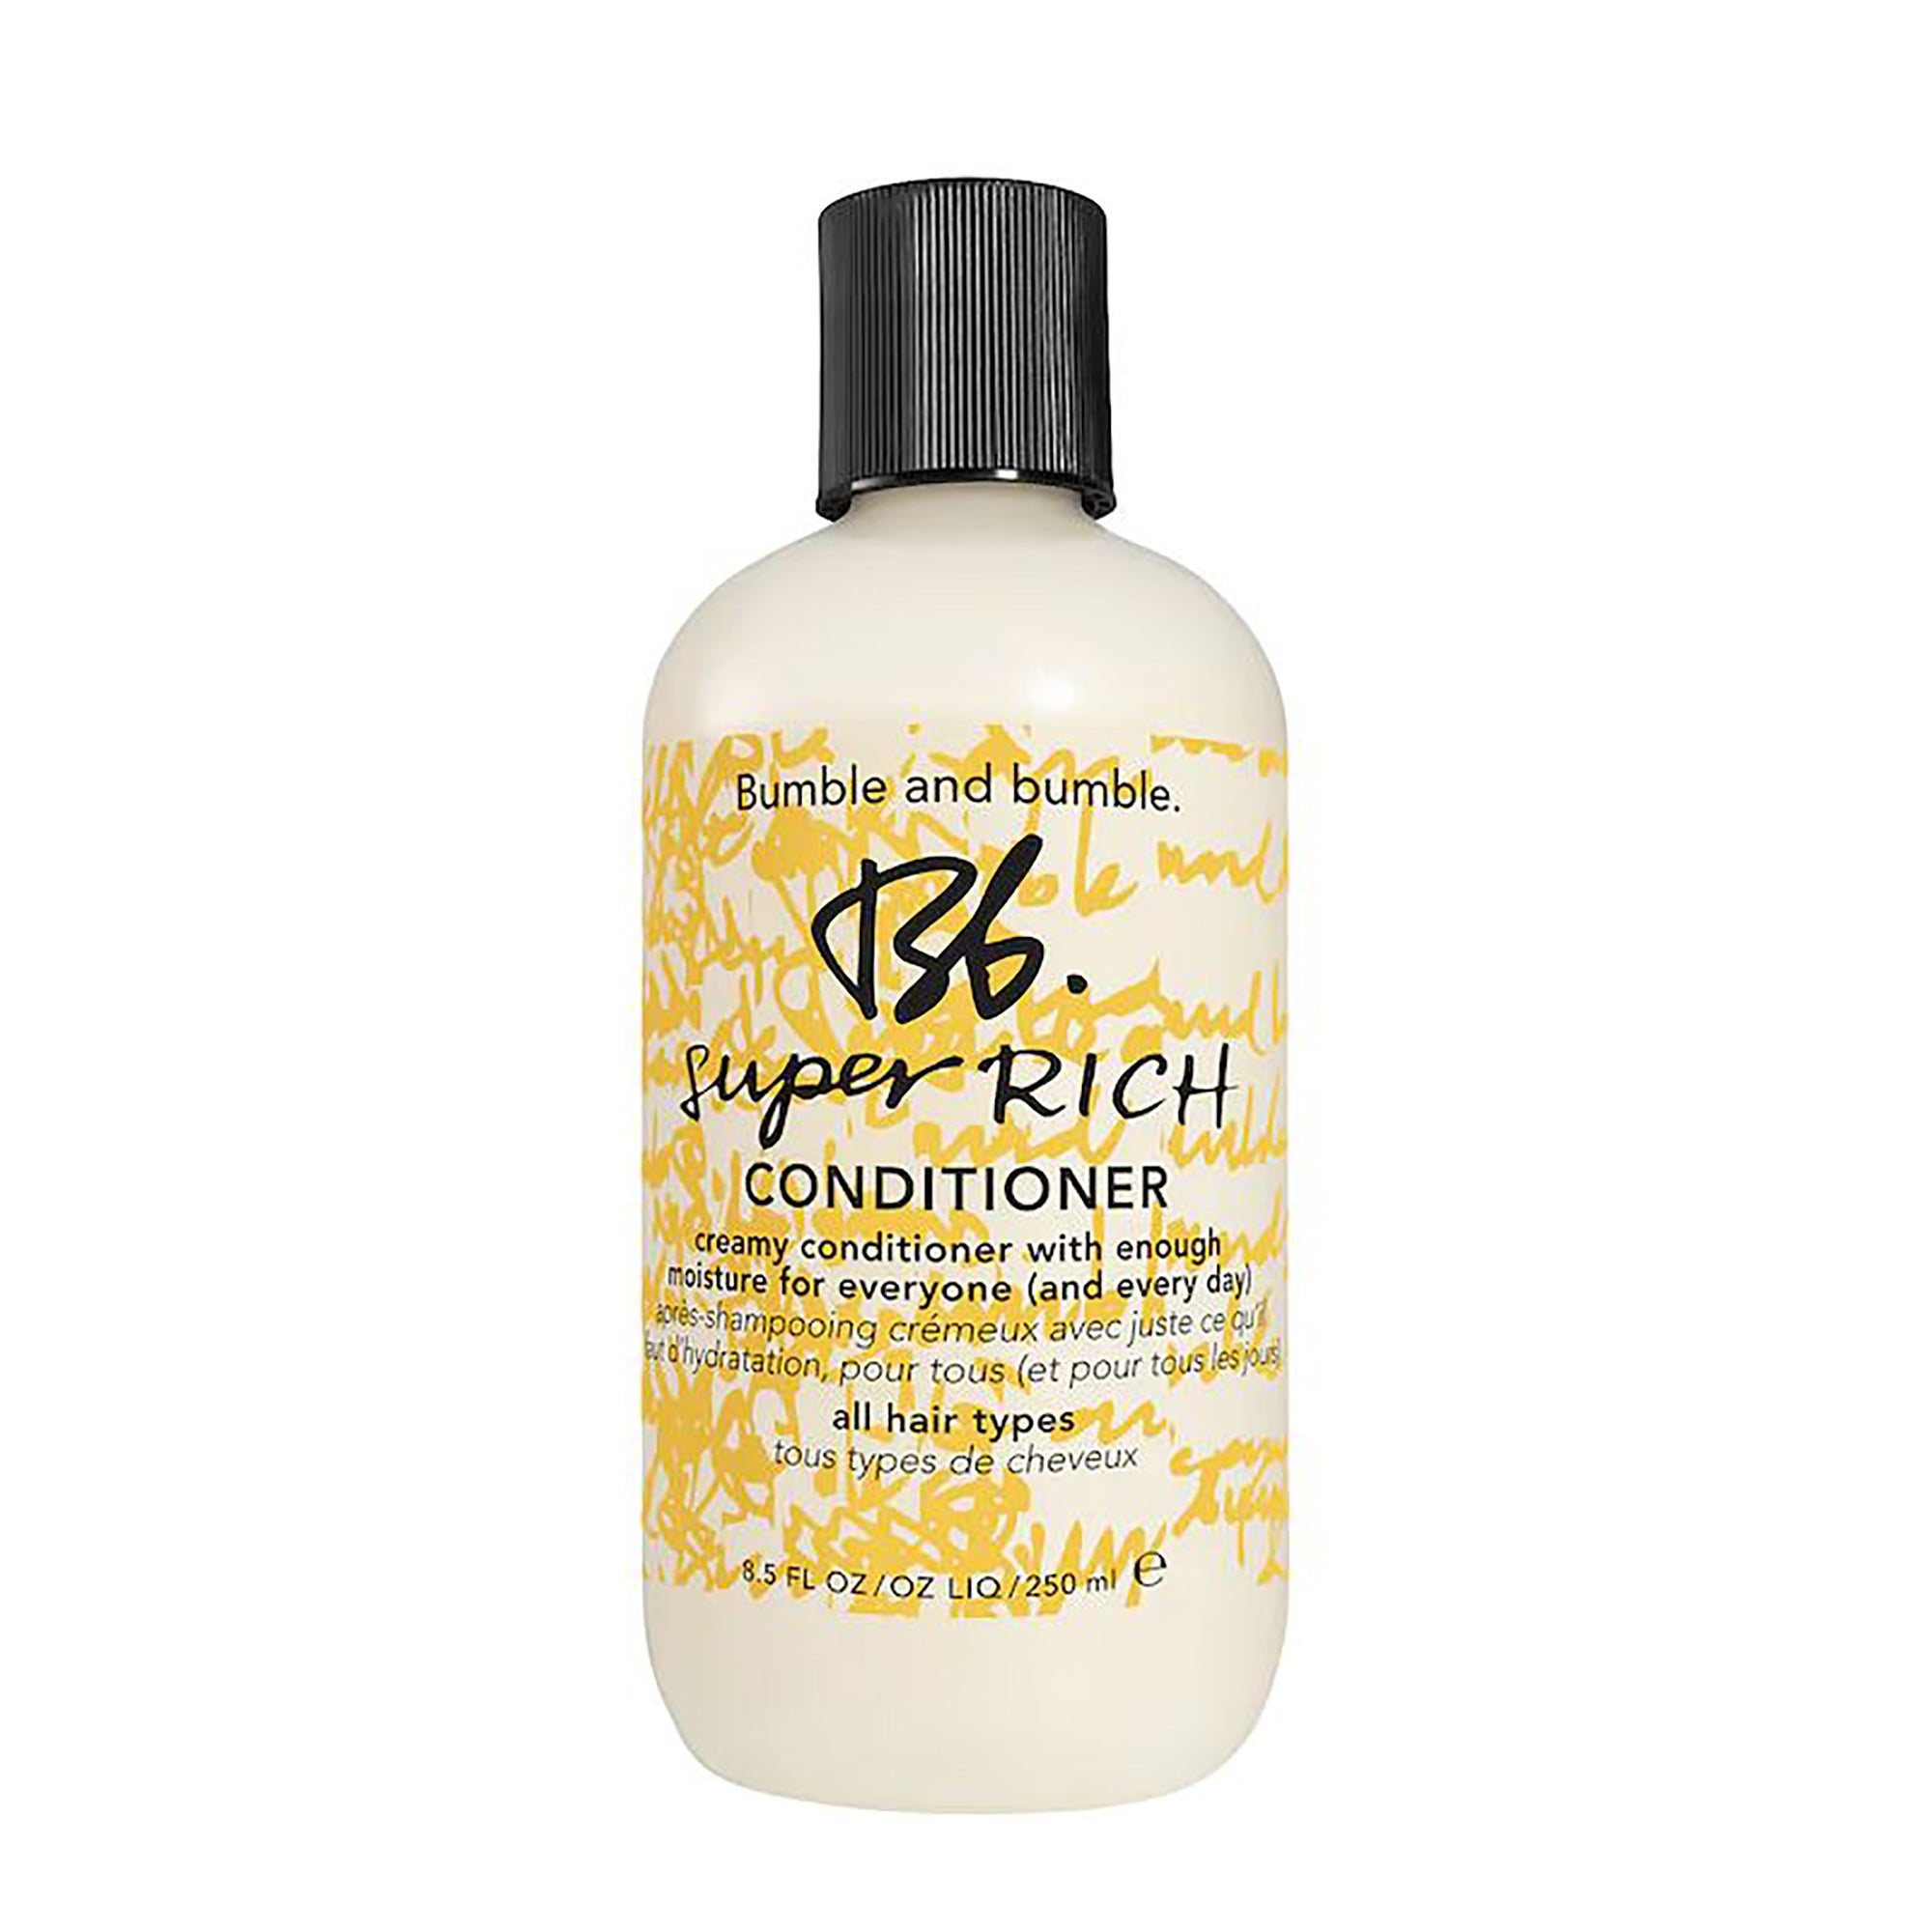 Bumble and bumble Super Rich Conditioner / 8OZ